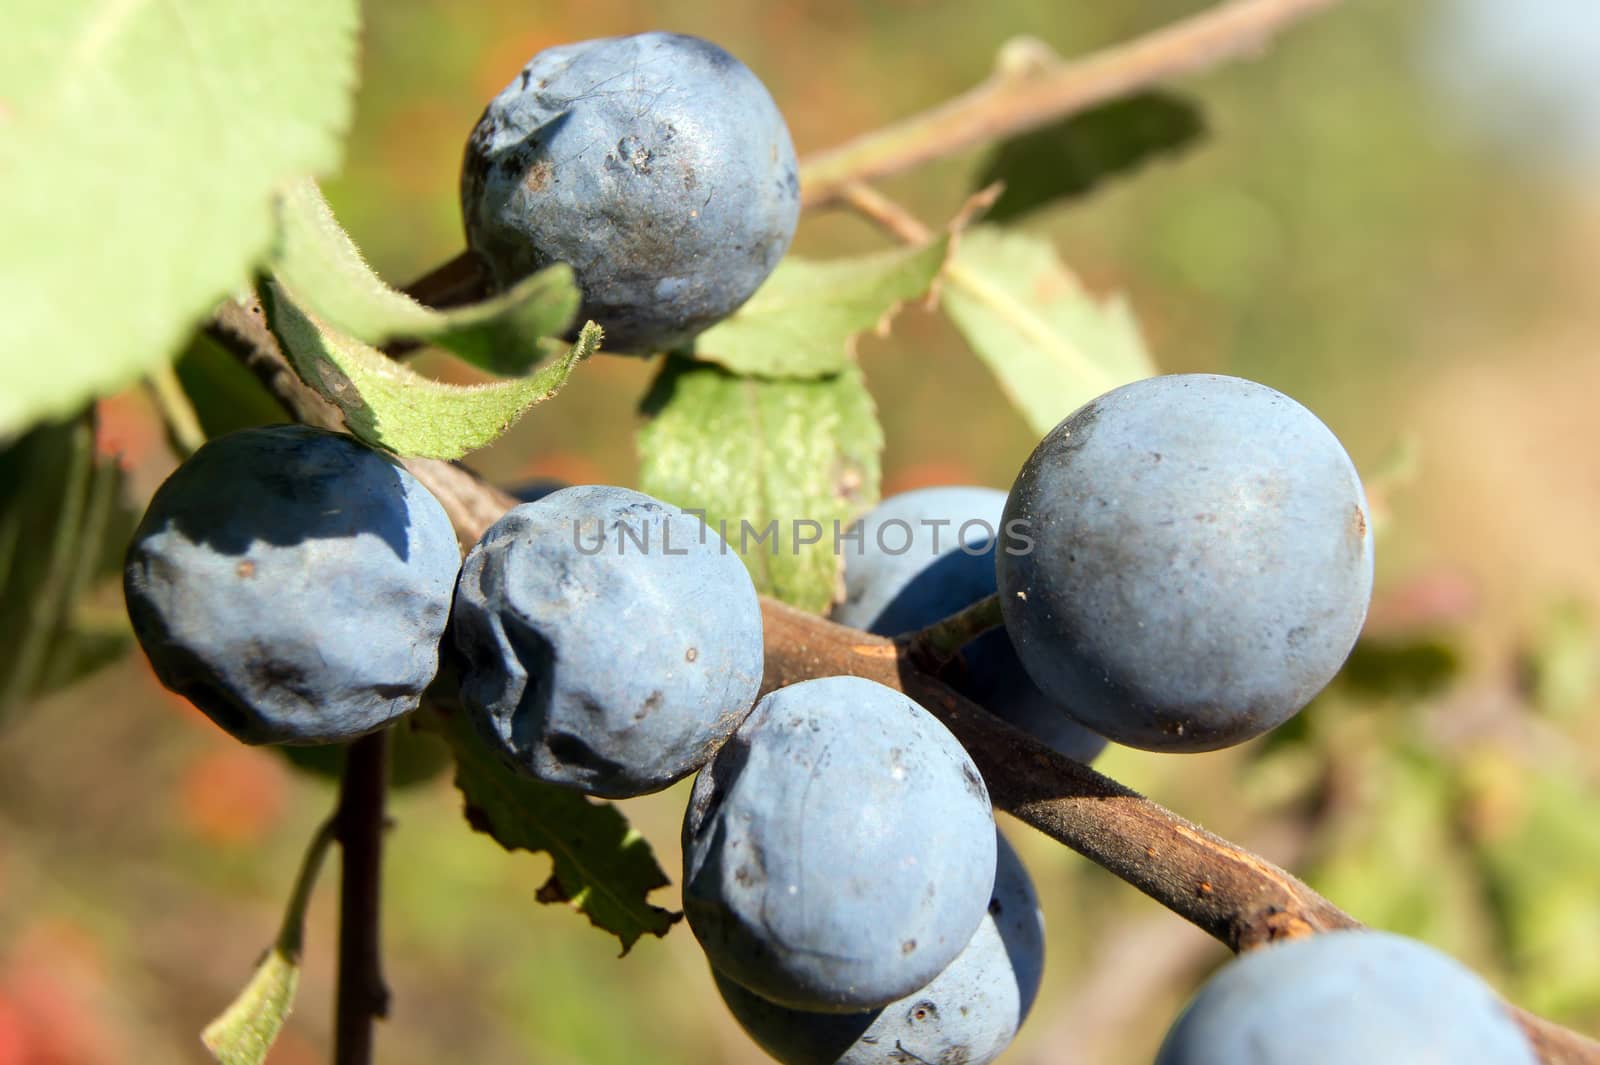 The blue sloe (Prunus spinosa) fruit of the autumn forest.